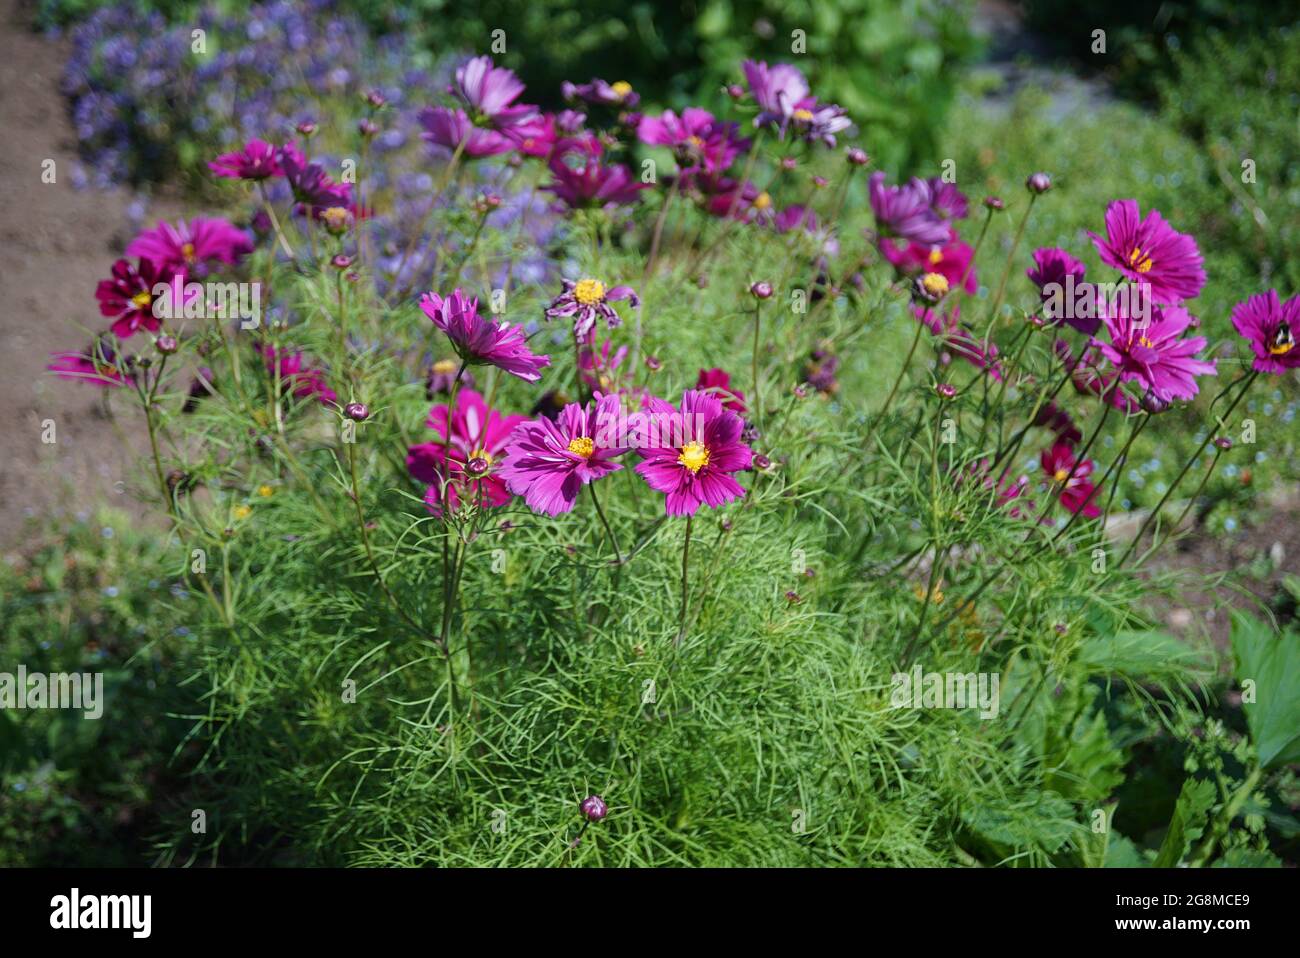 flowers and other plants growing in the spring sunlight Stock Photo